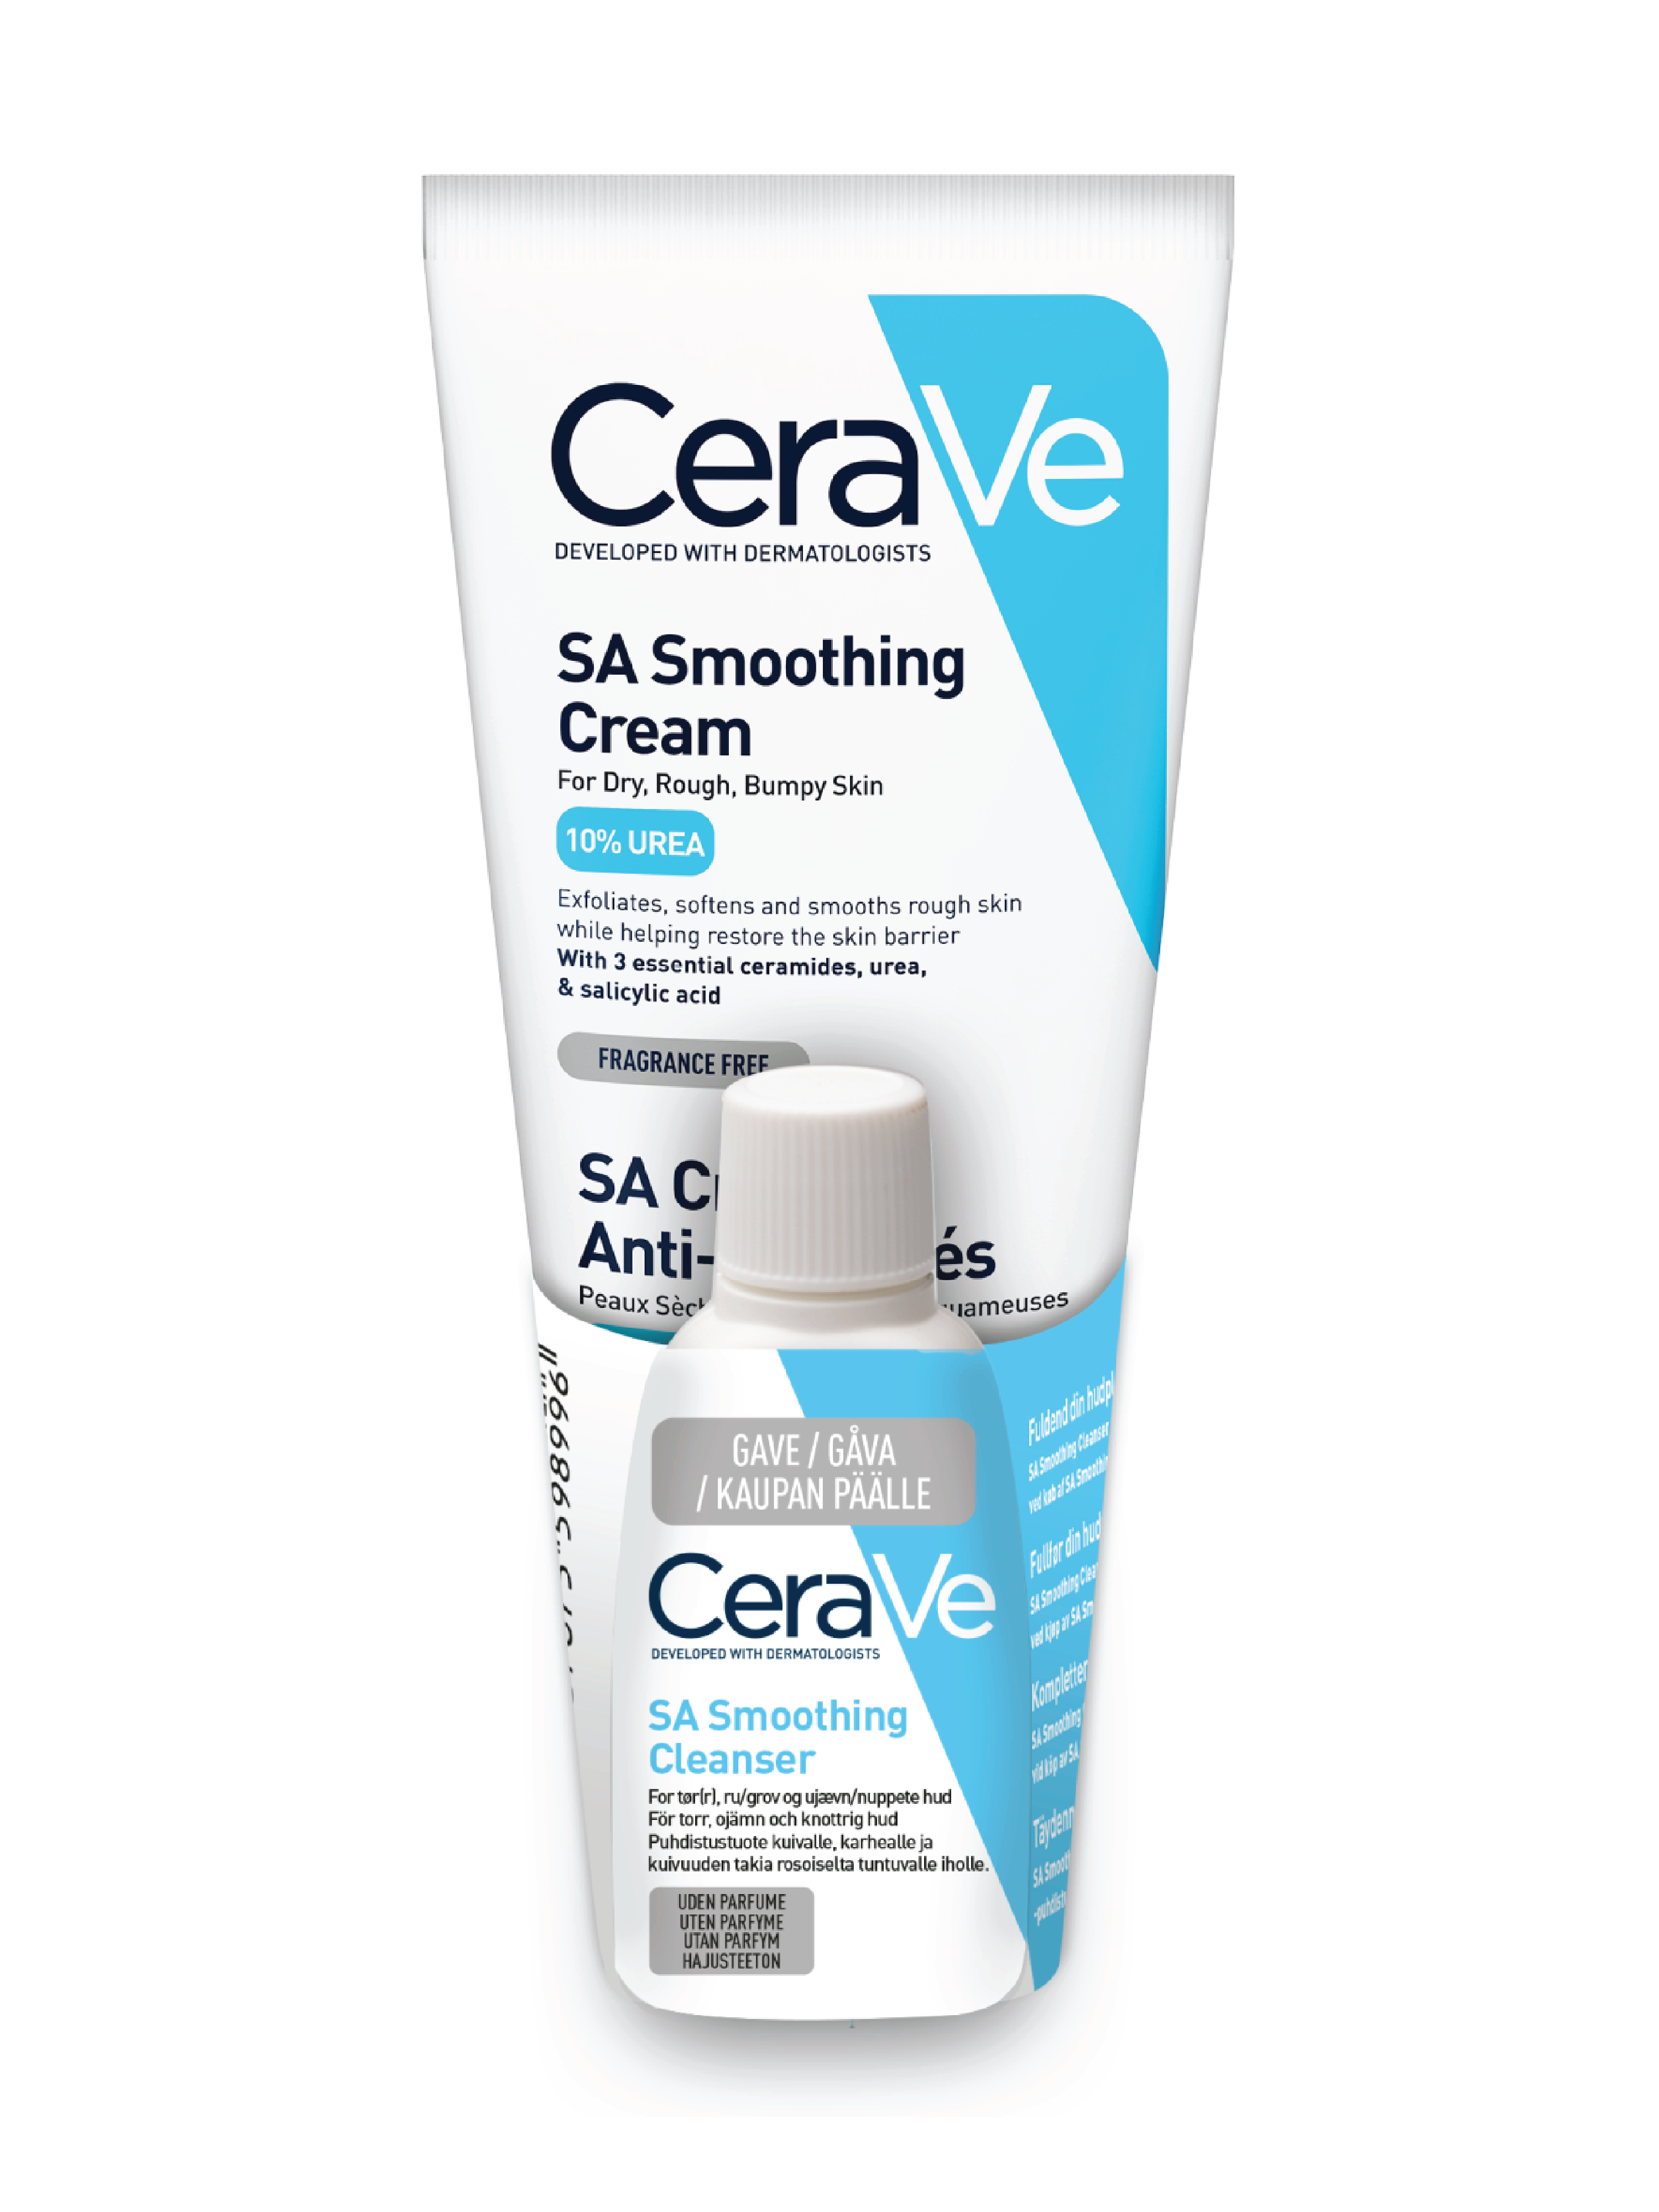 CeraVe SA Smoothing Cream & SA Smoothing Cleanser, 177 ml + 20 ml